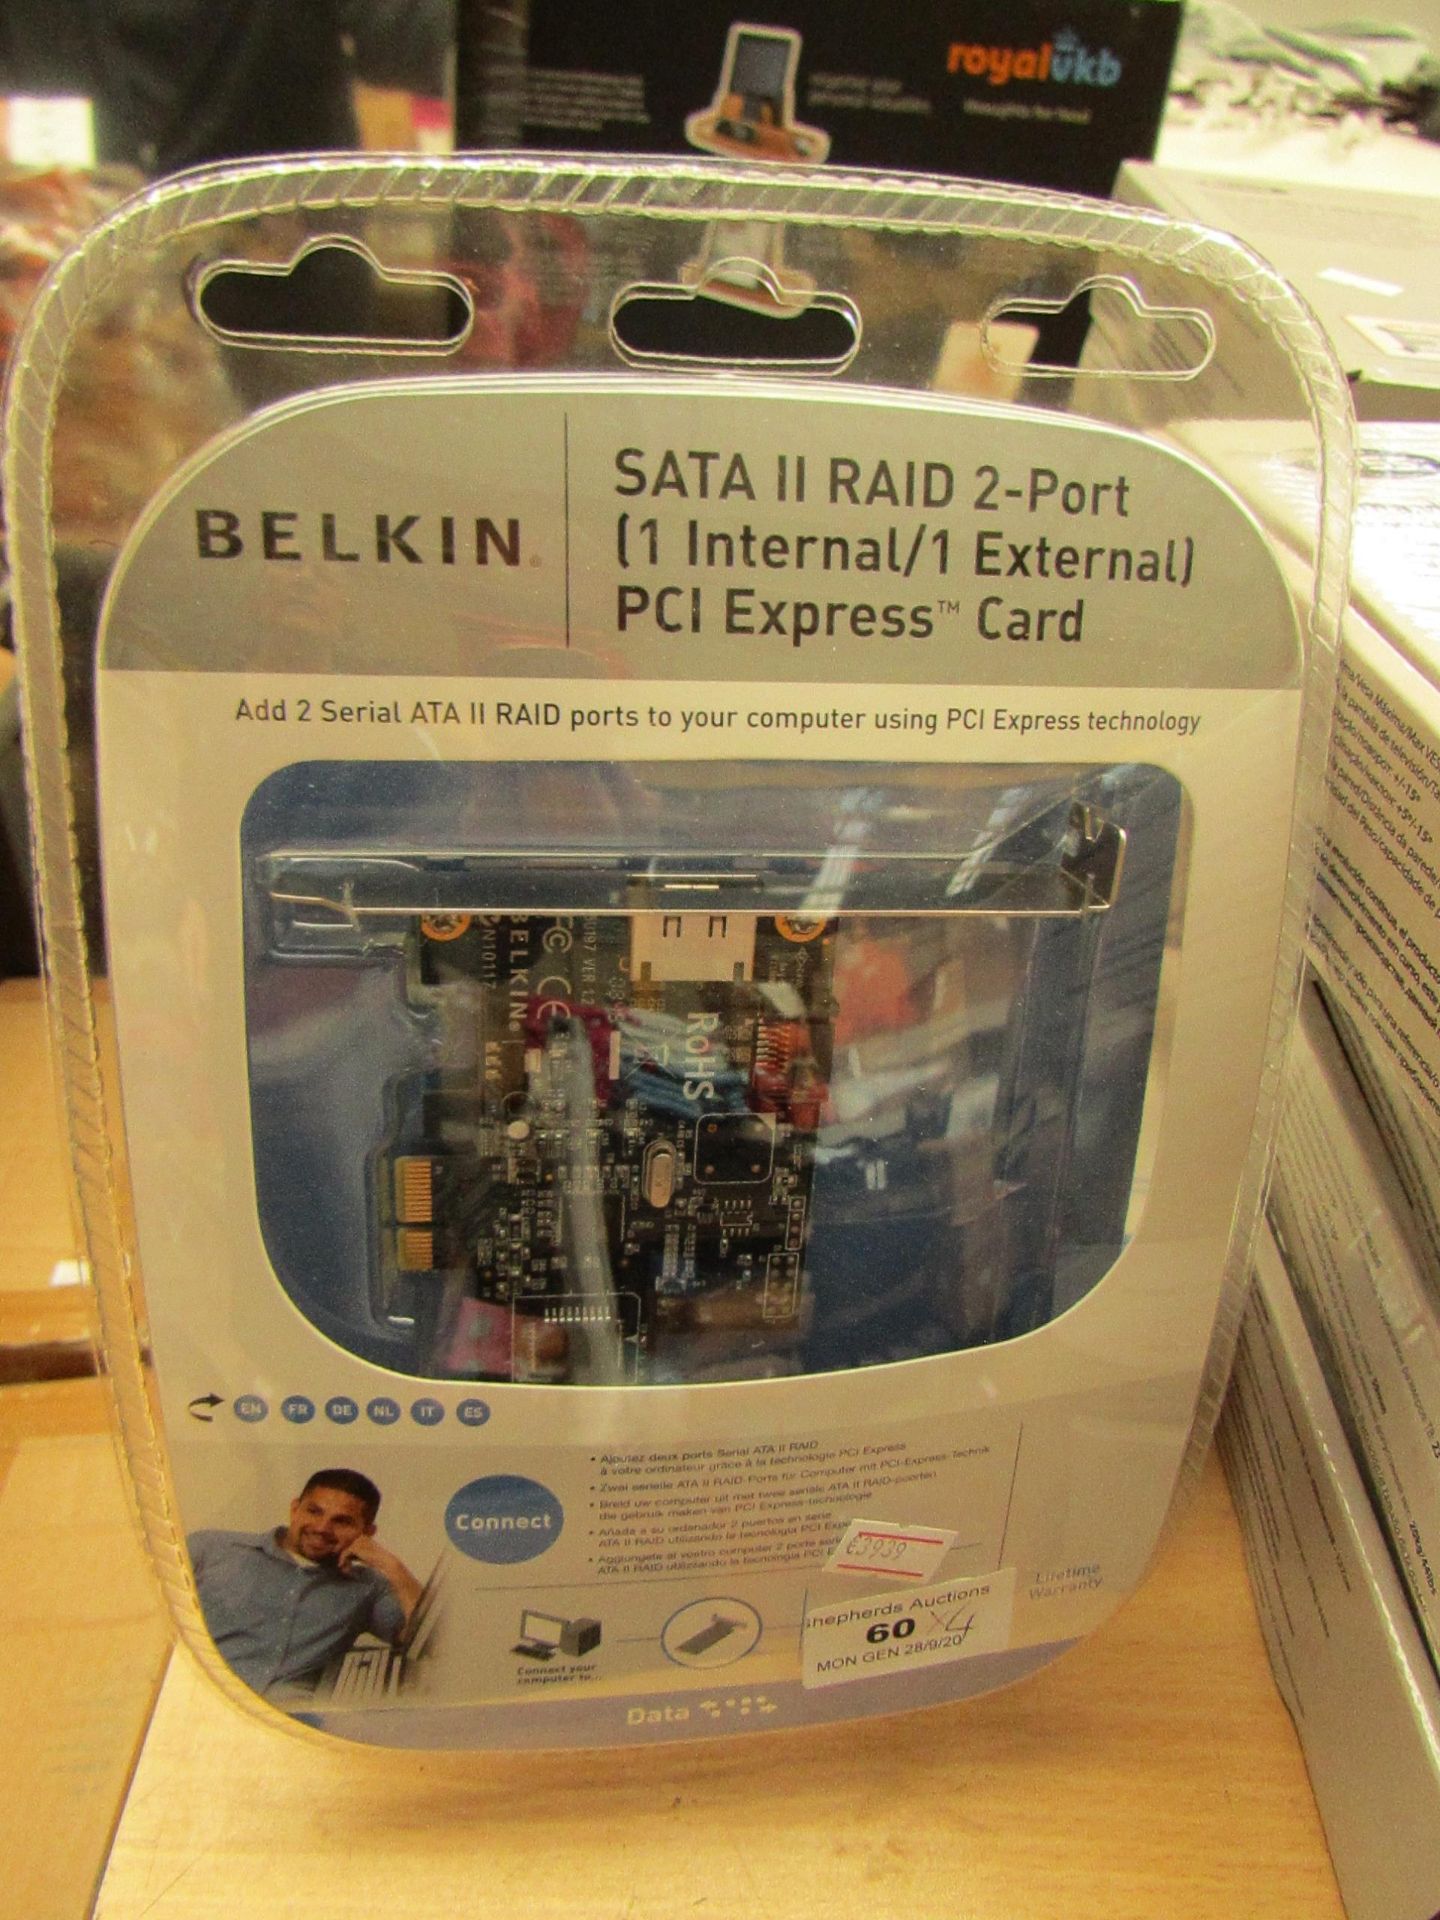 4 x Belkin Sata Raid 2 Port PCI Express Cards. Unsued & Blister Packed